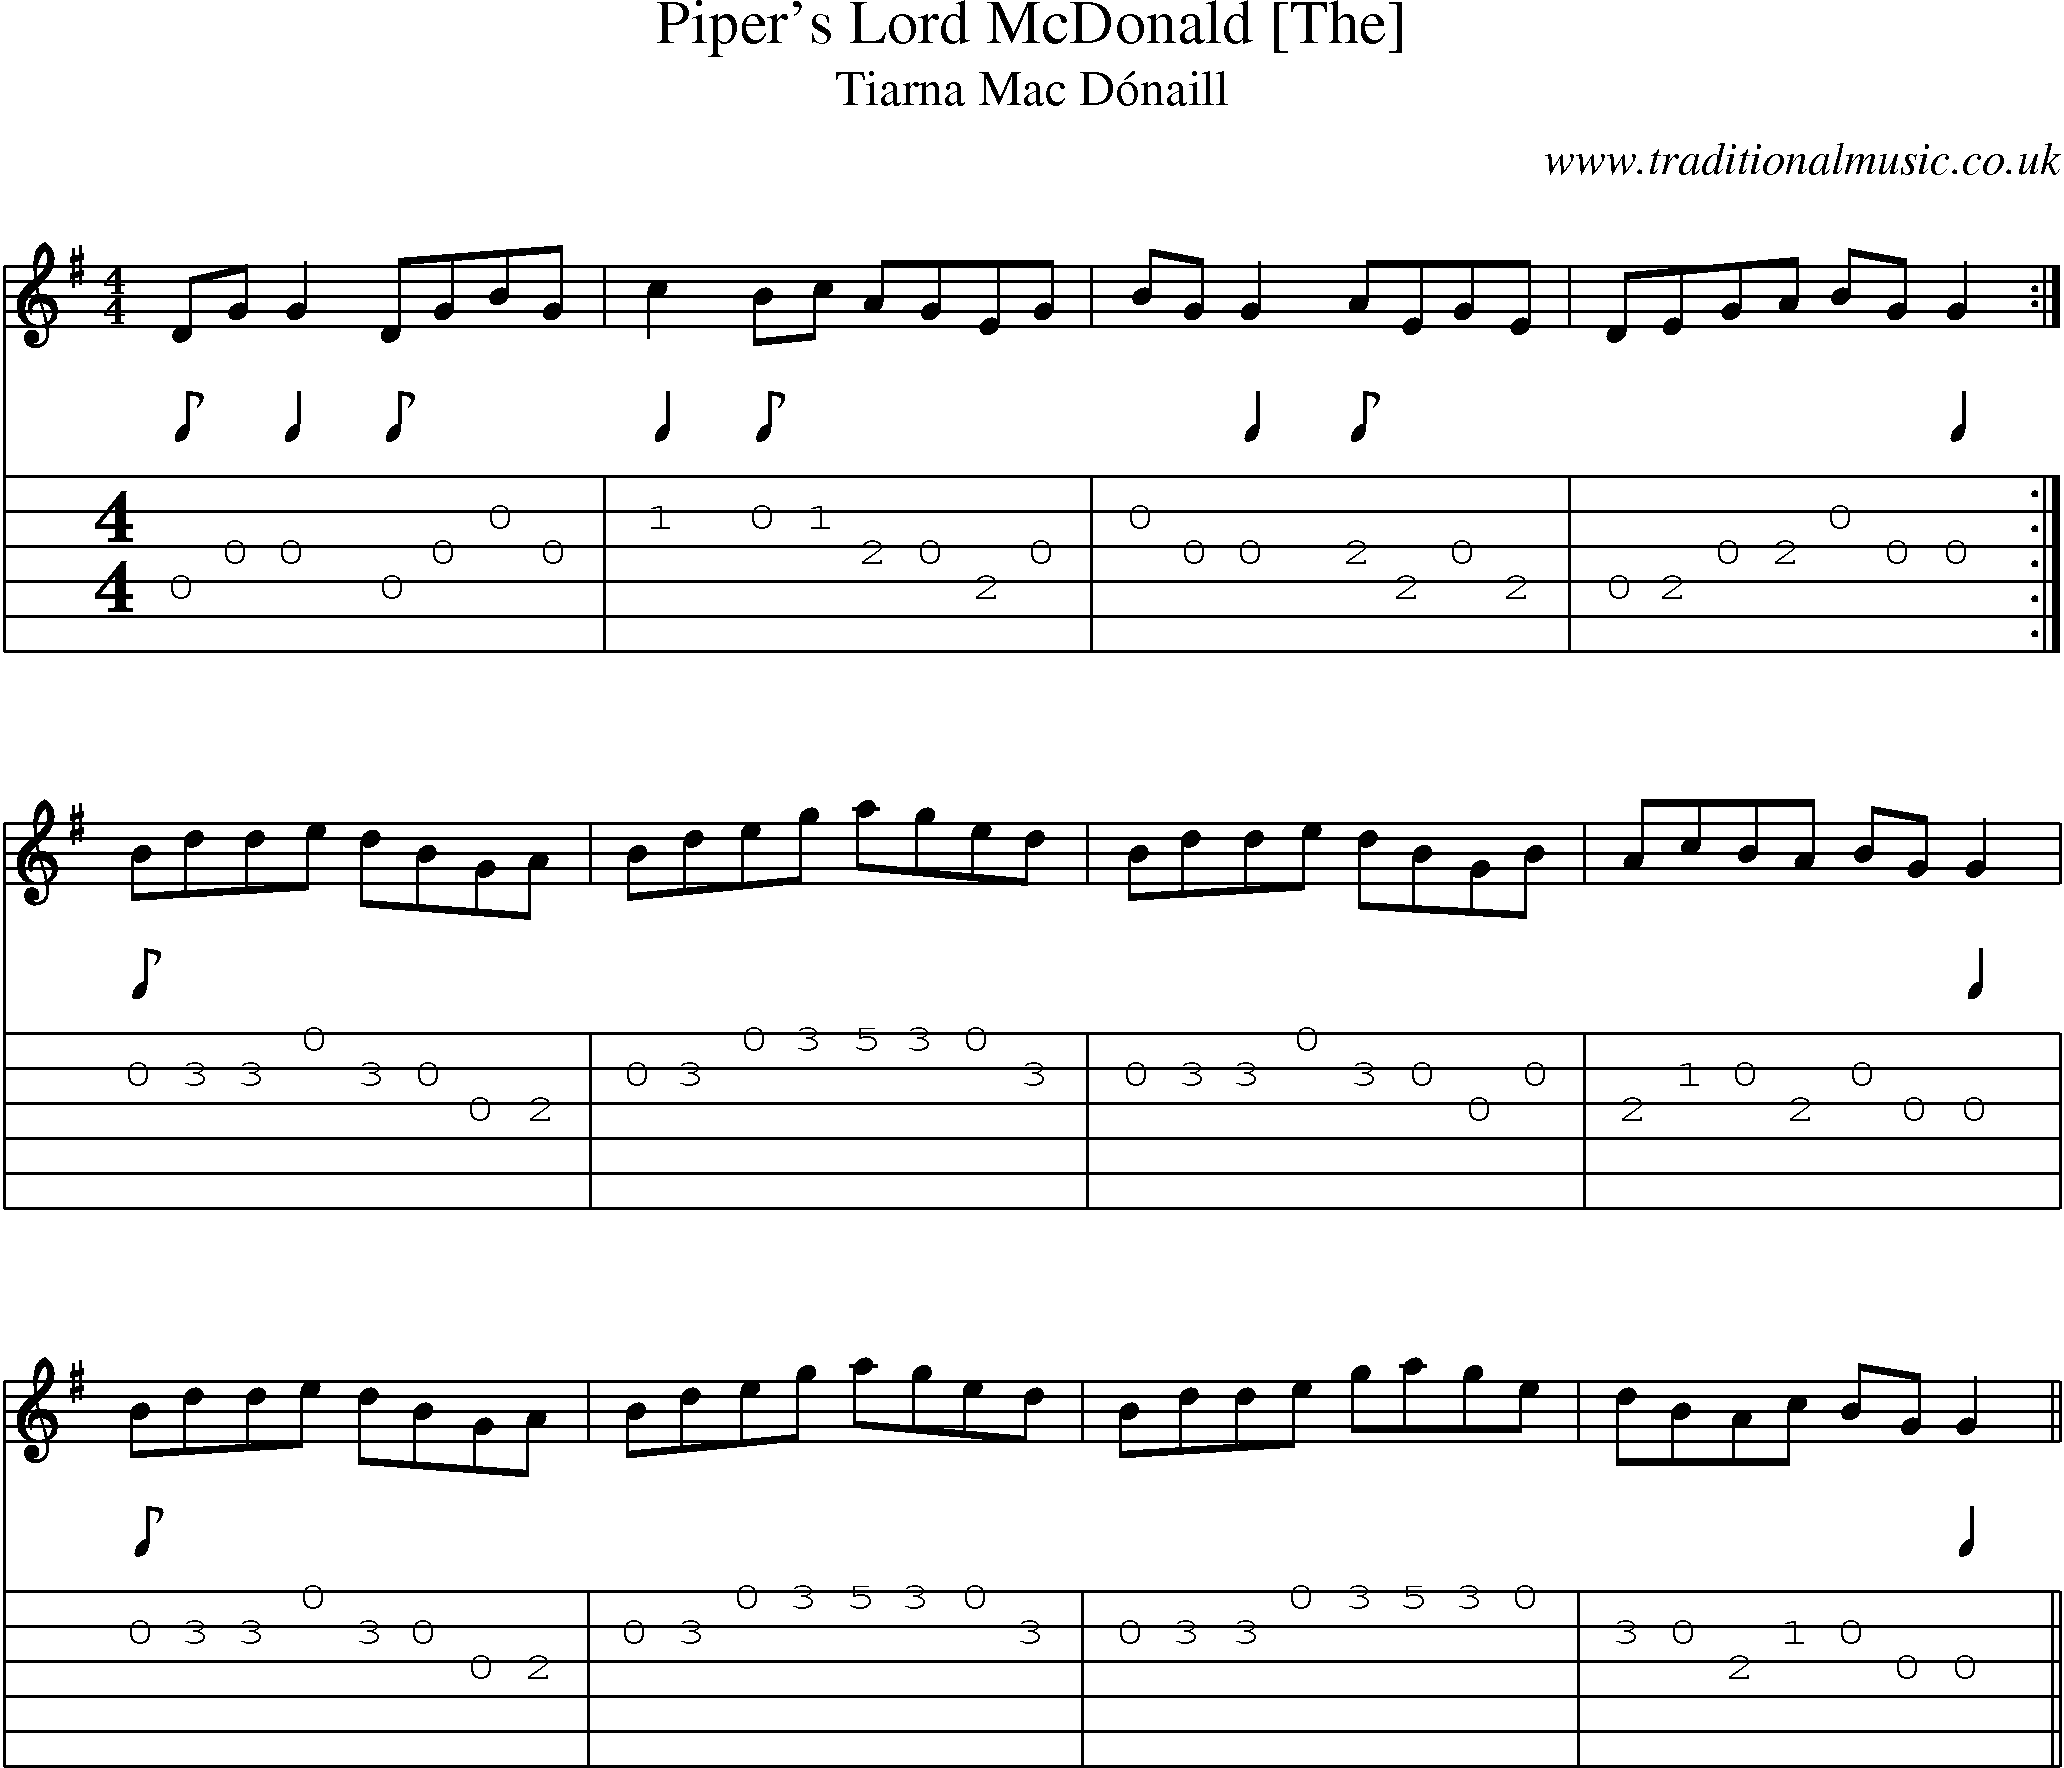 Music Score and Guitar Tabs for Pipers Lord Mcdonald